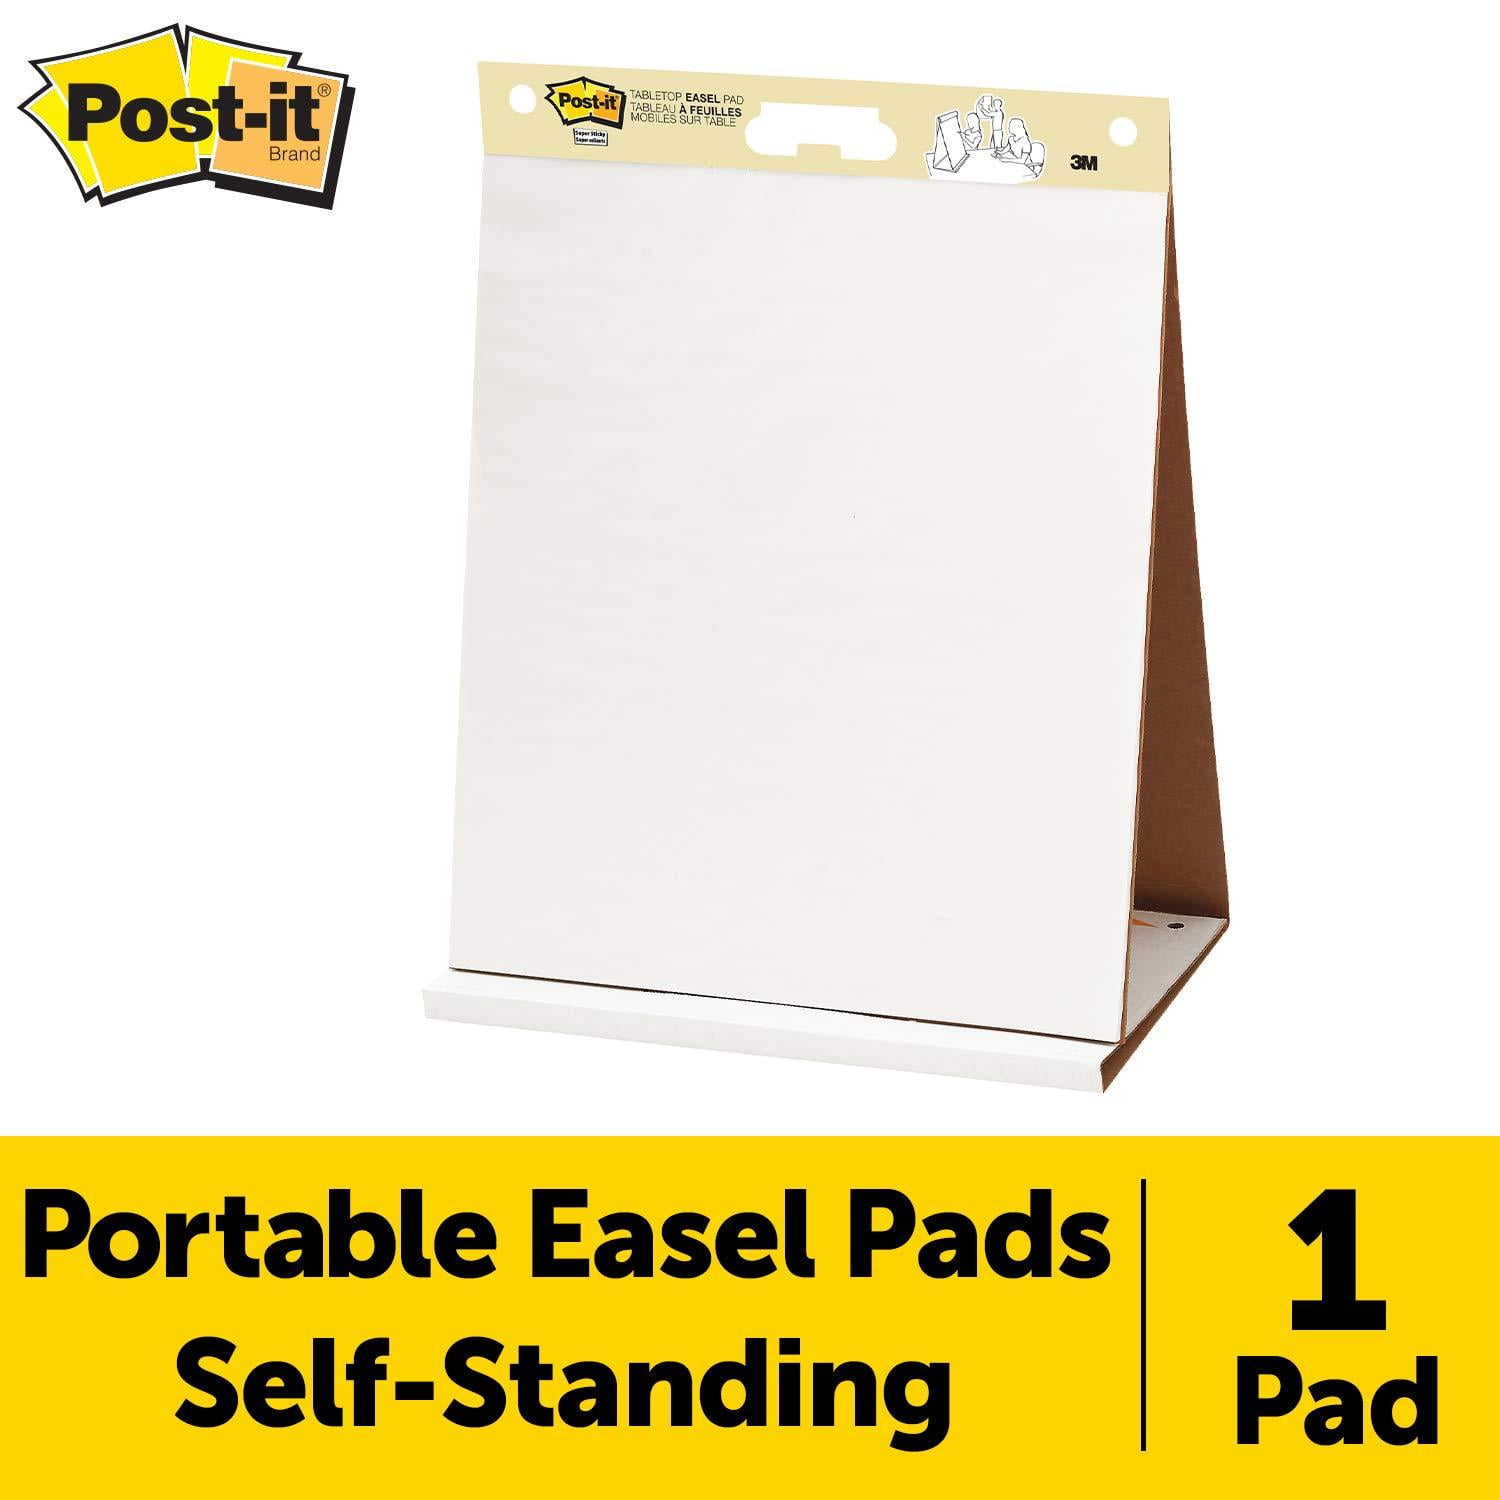 Post It Super Sticky Tabletop Easel Pad 20 X 23 Inches 20 Sheetspad 1 Pad 563r Portable